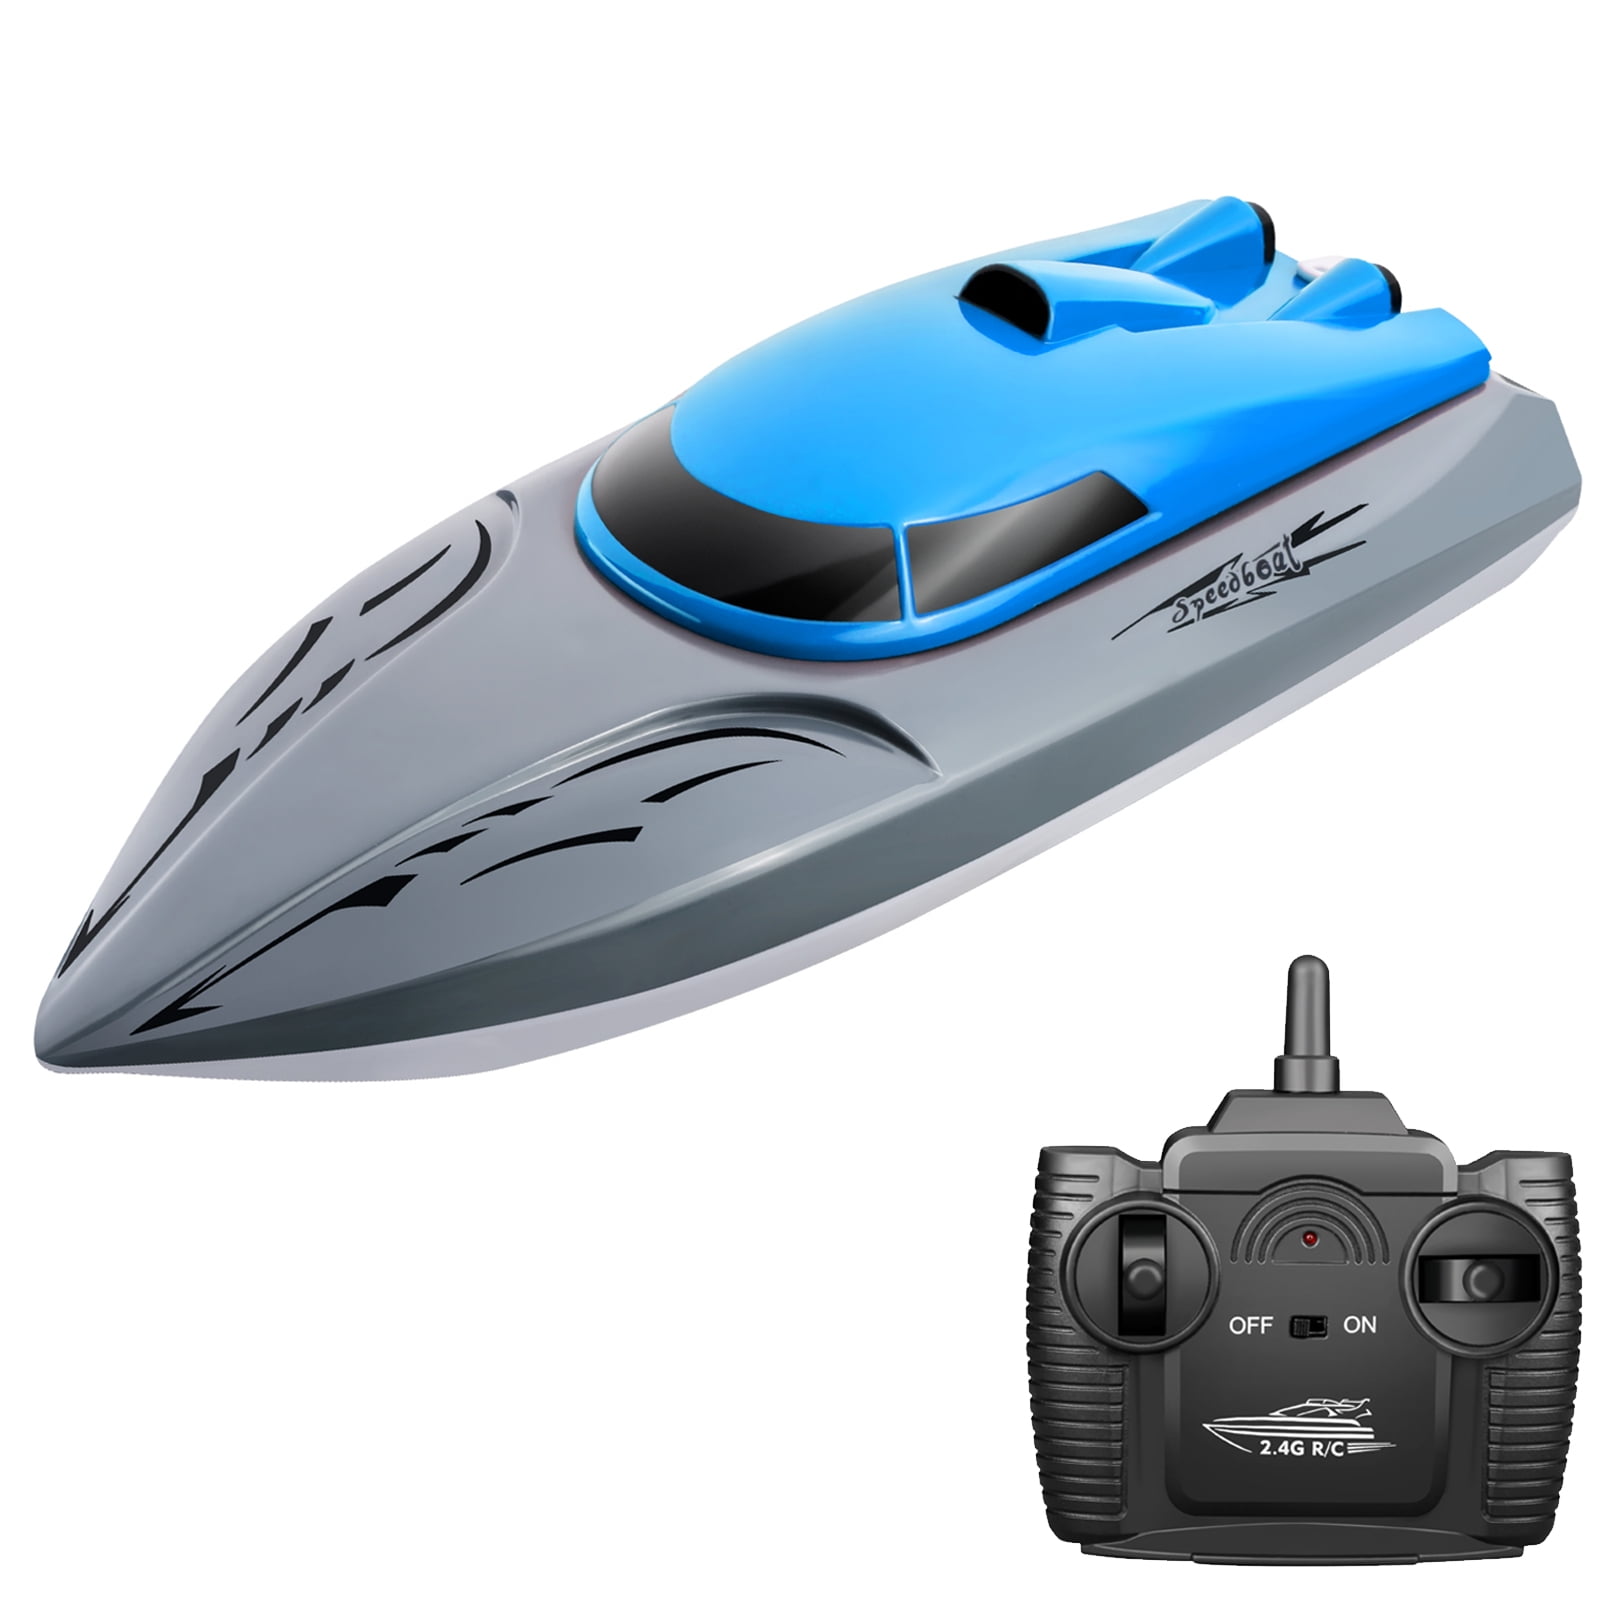 Details about   Plastic RC Racing Boat Remote Control Ship High Speed Twin Motor Kids Toys